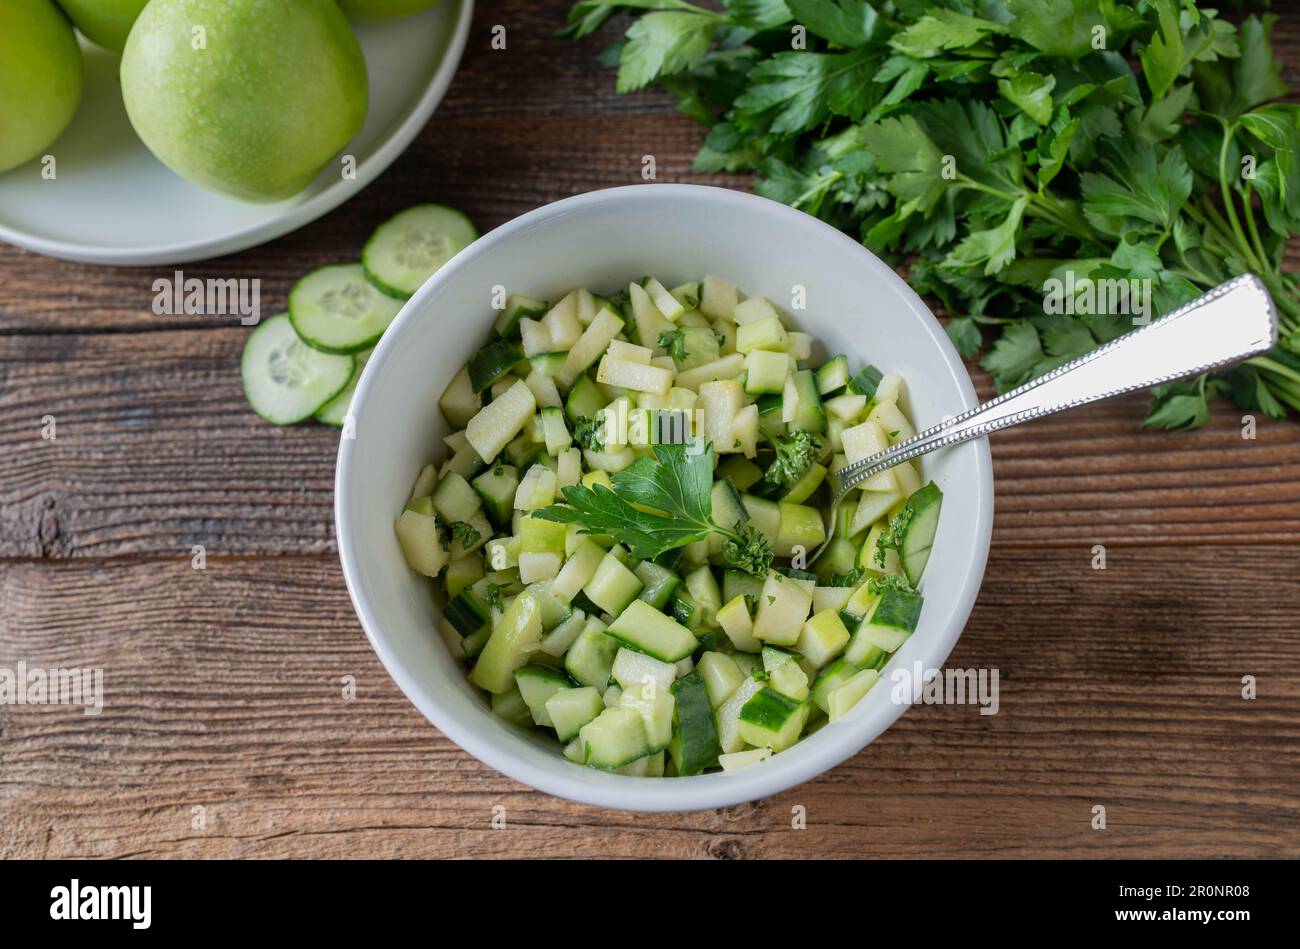 Fruit vegetable salad with marinated green apples and cucumber in a bowl on wooden table Stock Photo